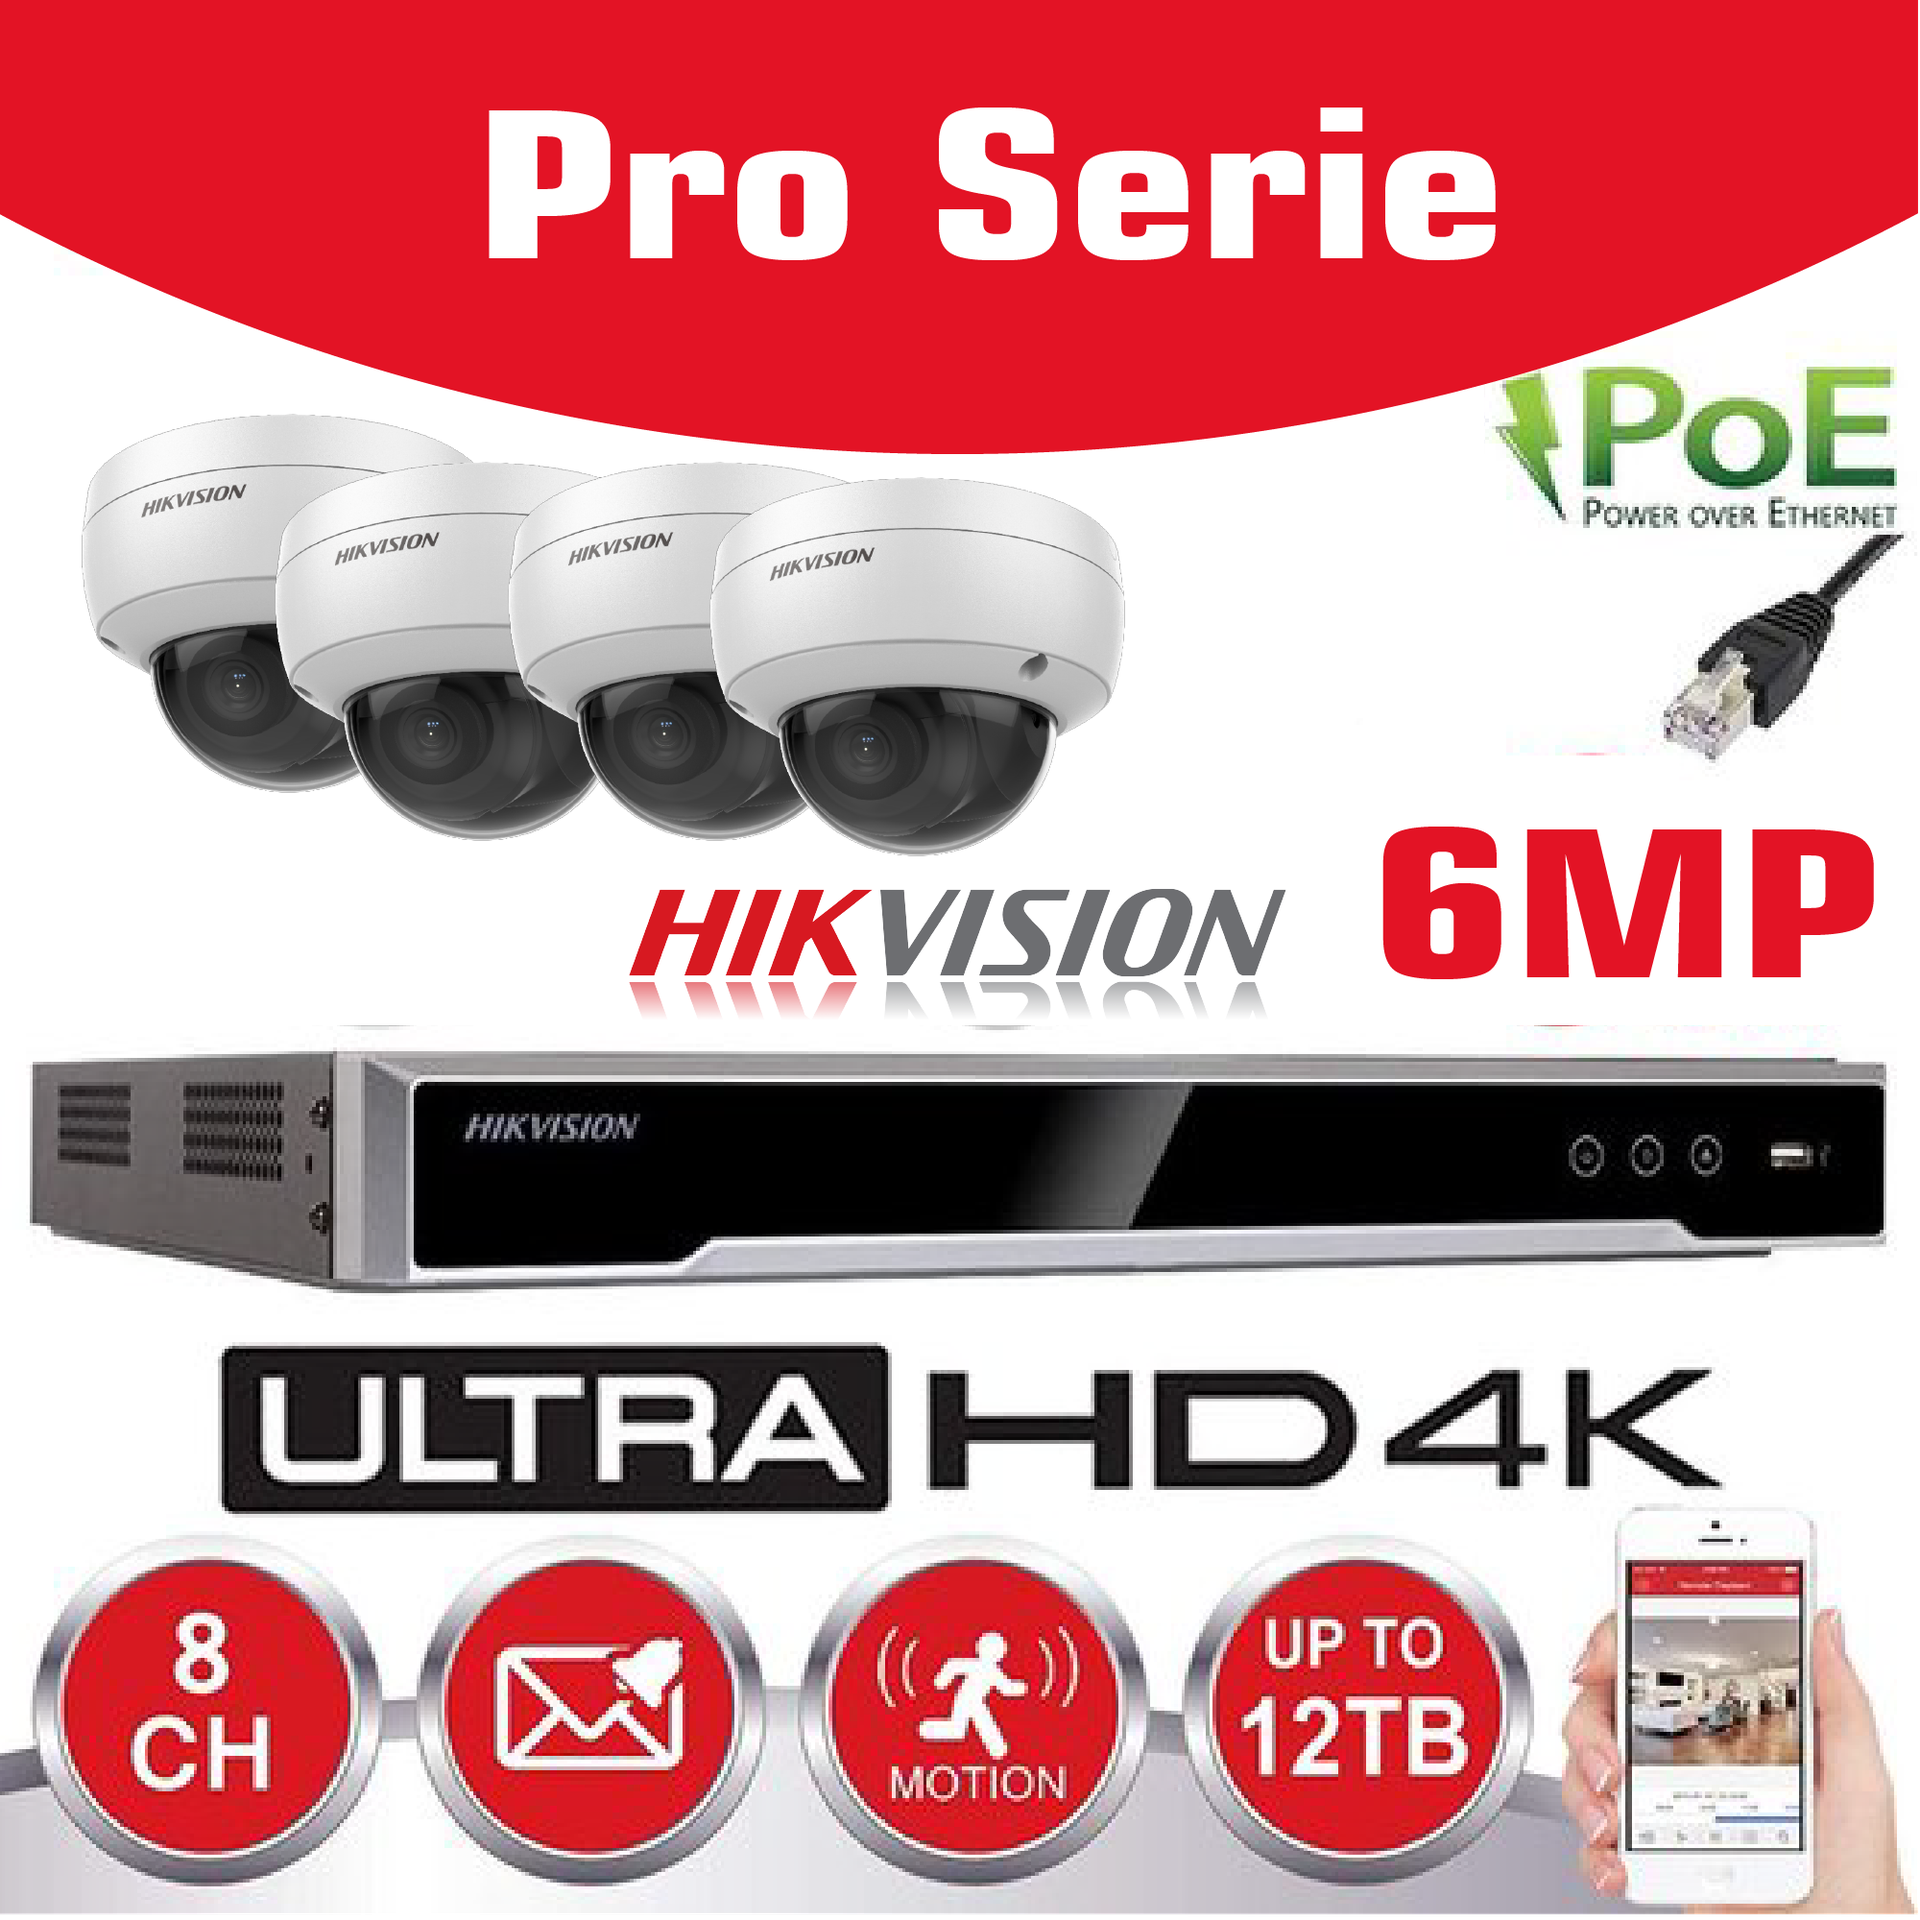 [HIKPRO-6M4D] HIKVISION 6MP Surveillance Camera Kit  Pro Serie - NVR 8Ch  4K UHD IP POE - 4x 6MP IP CAMERA Pro-Serie In/Outdoor Night Vision IR Up to 30m - 2TB HDD Storage